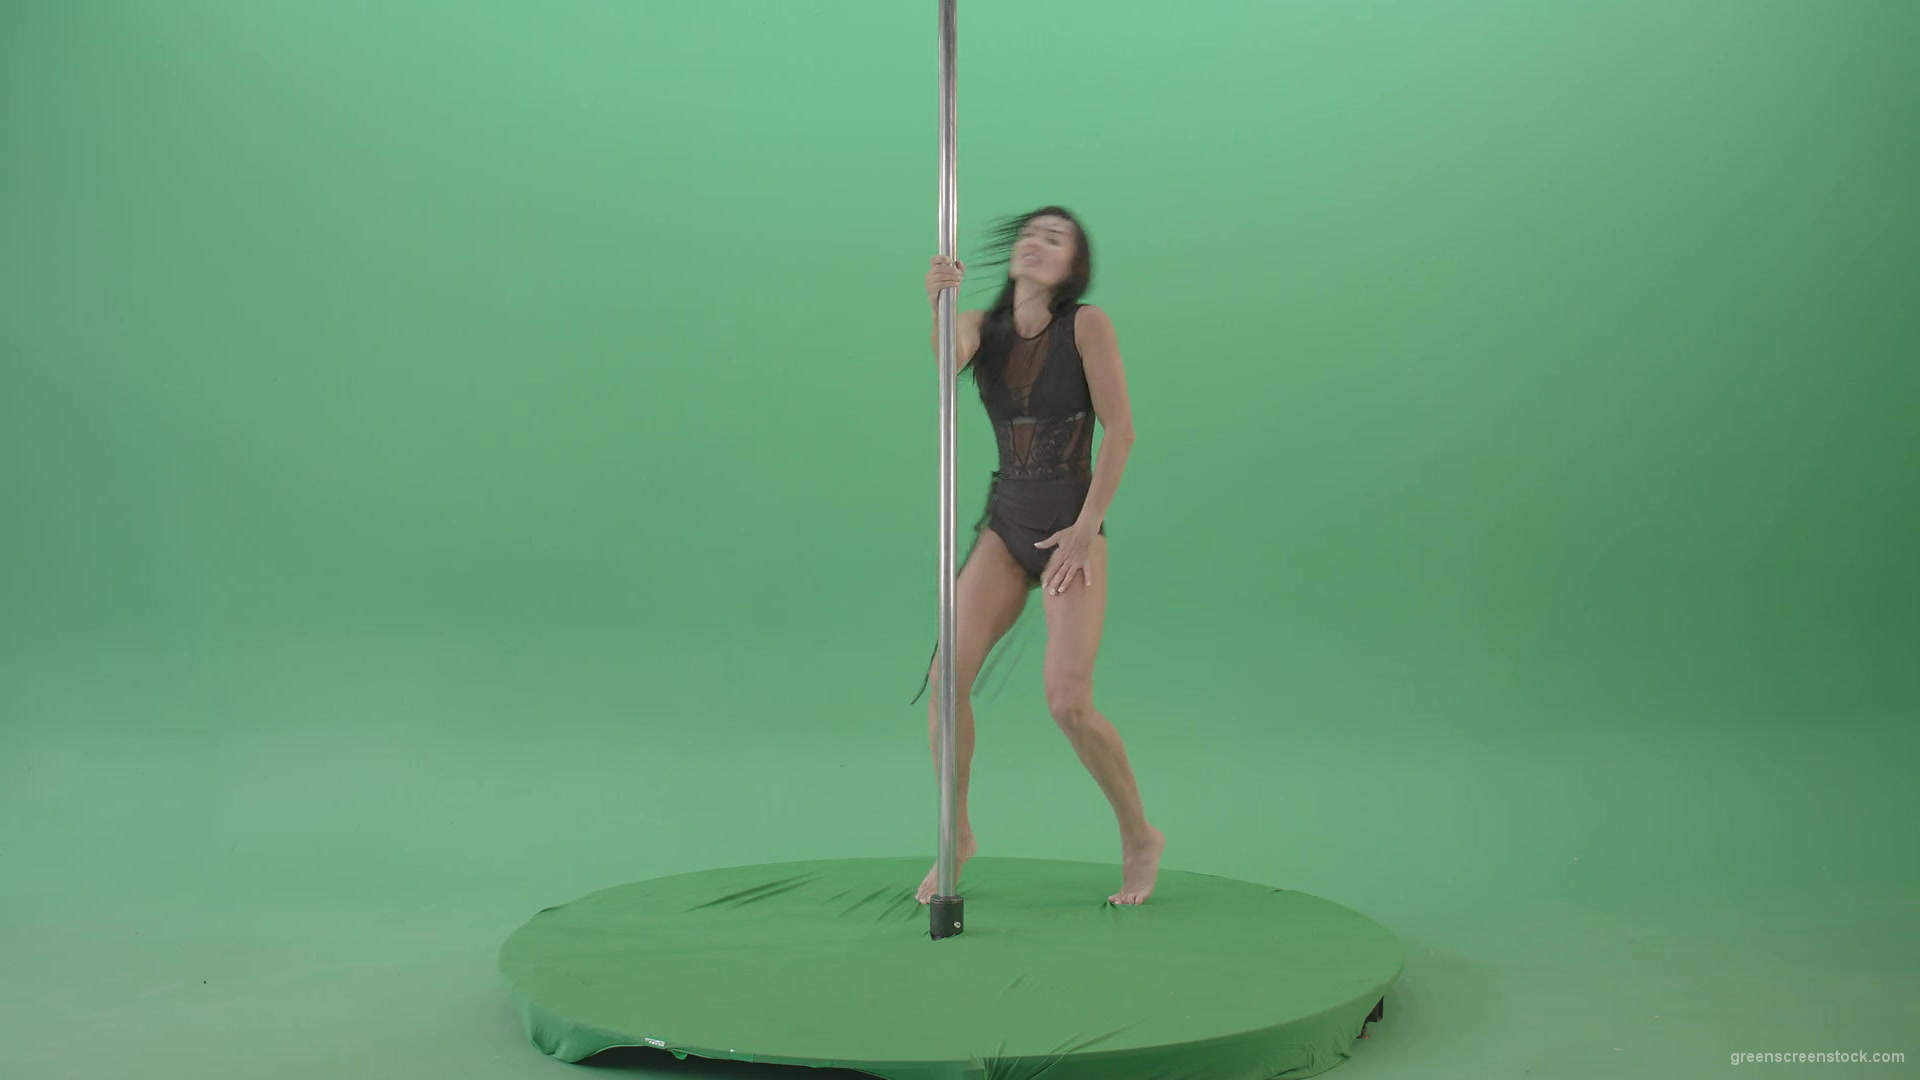 Sexy-girl-in-Lingerie-wear-dancing-strip-pole-dance-isolated-on-green-screen-4K-Video-Footage-1920_006 Green Screen Stock